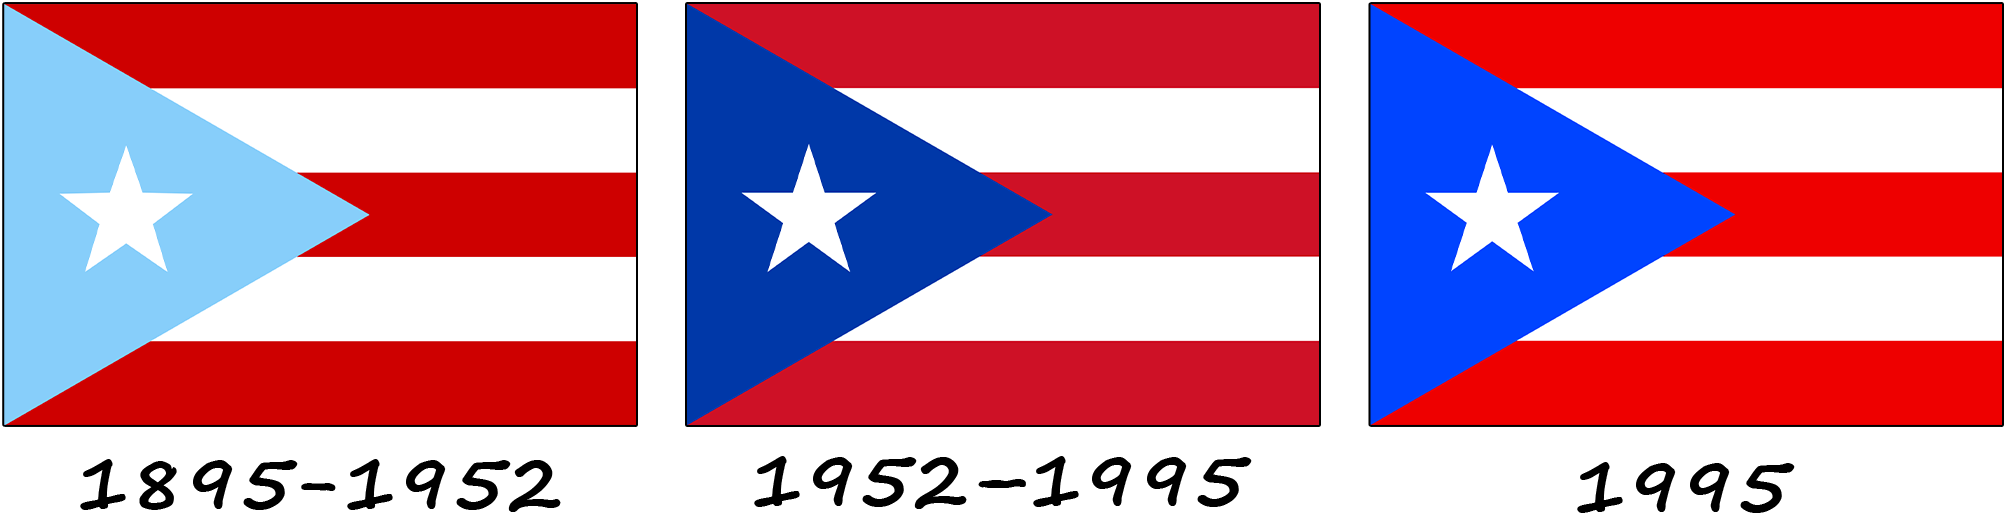 The evolution of the flag of Puerto Rico